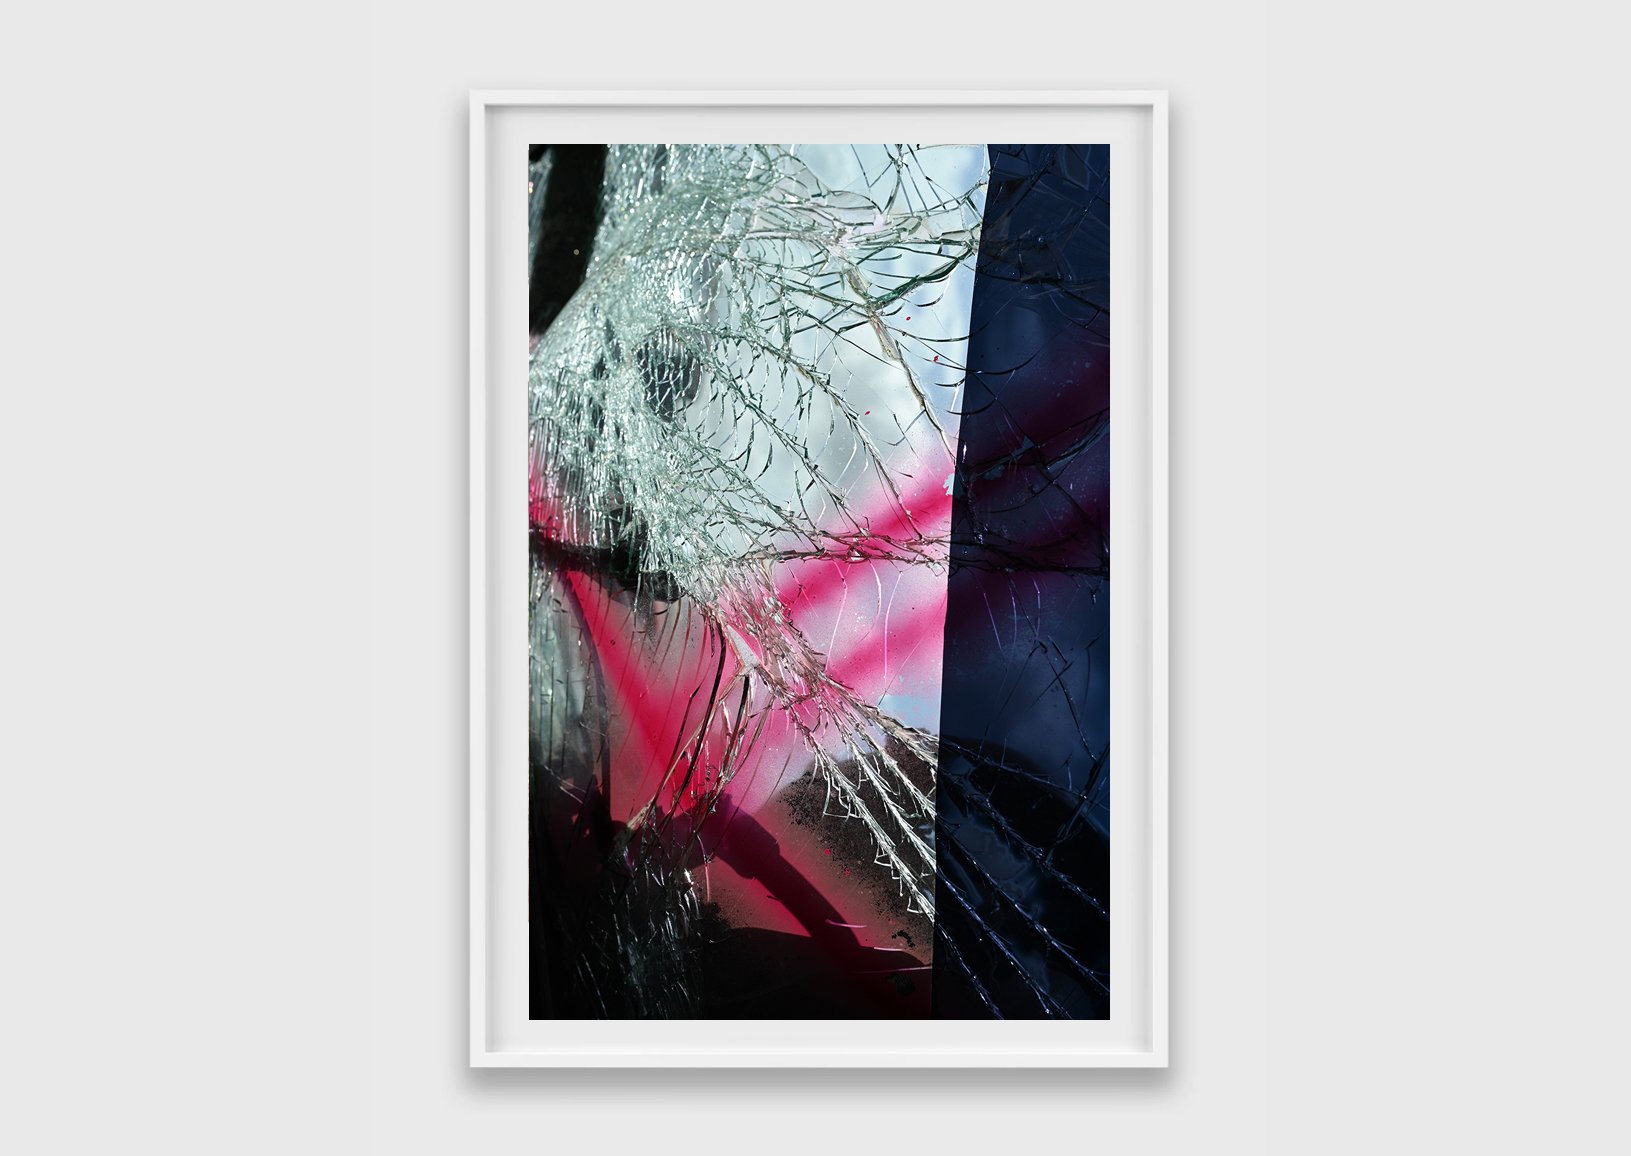   Untitled (hotpink)  archival print, 2021 